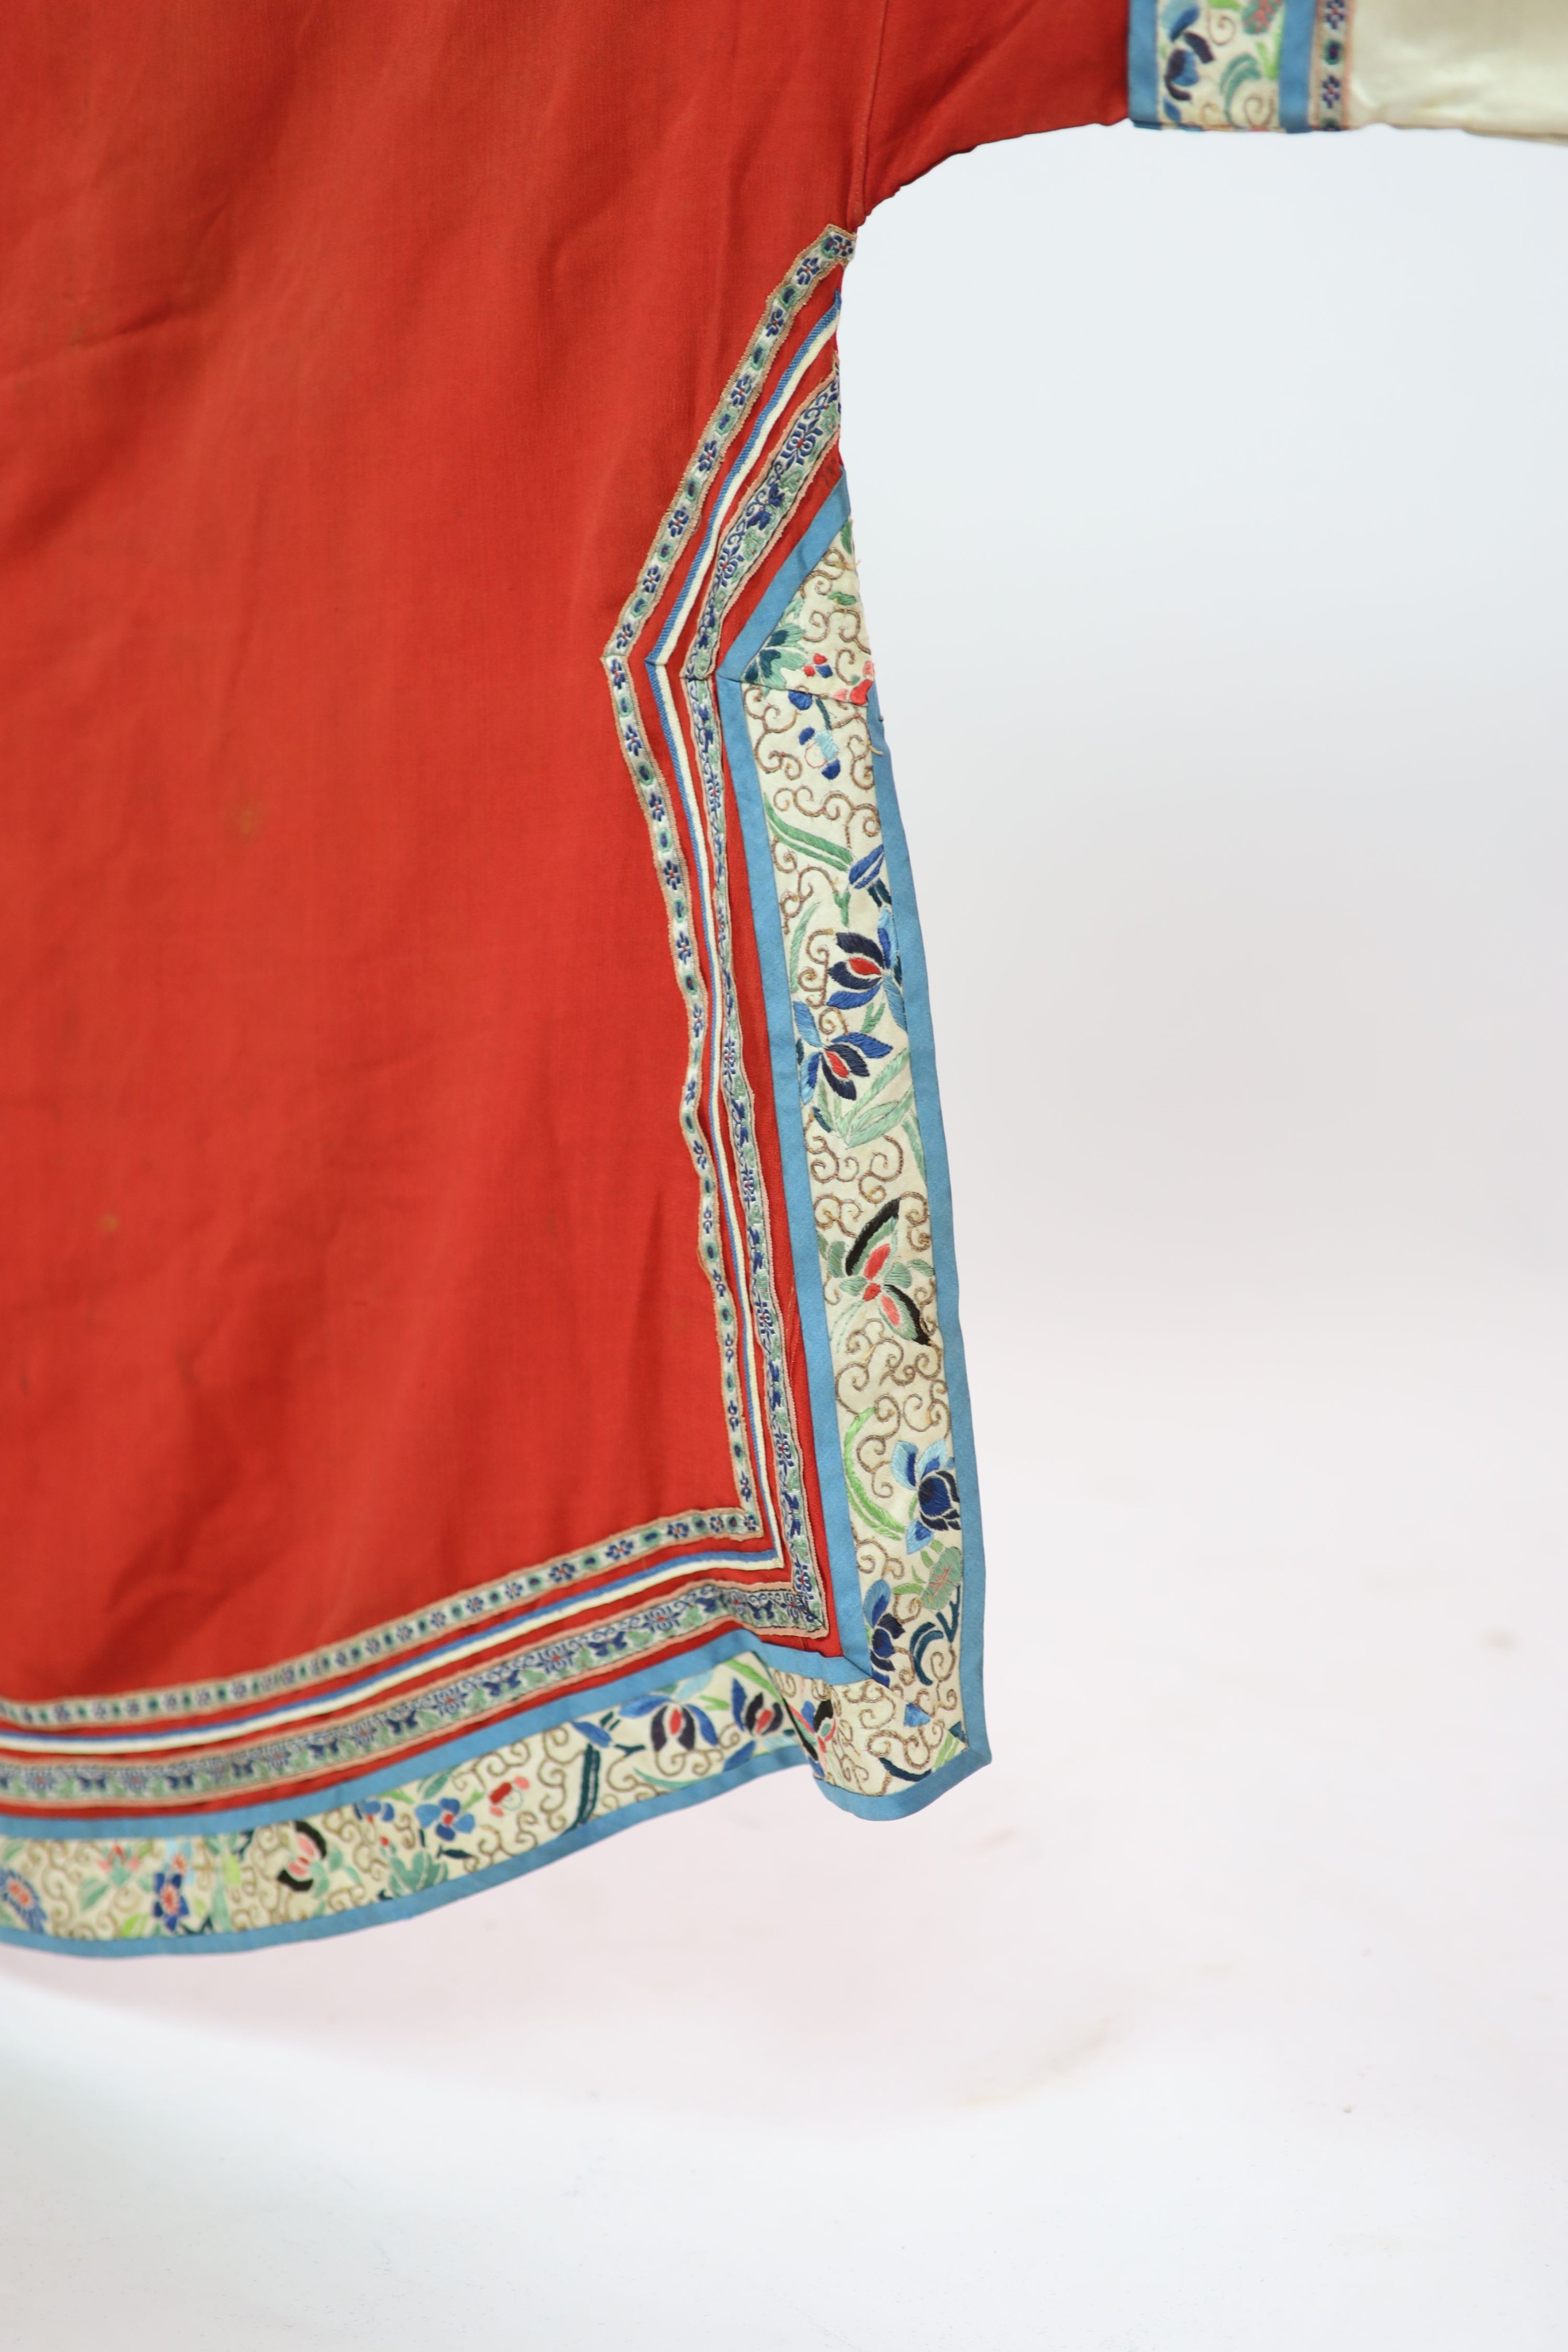 A Chinese red silk robe, late 19th century, 102cm drop